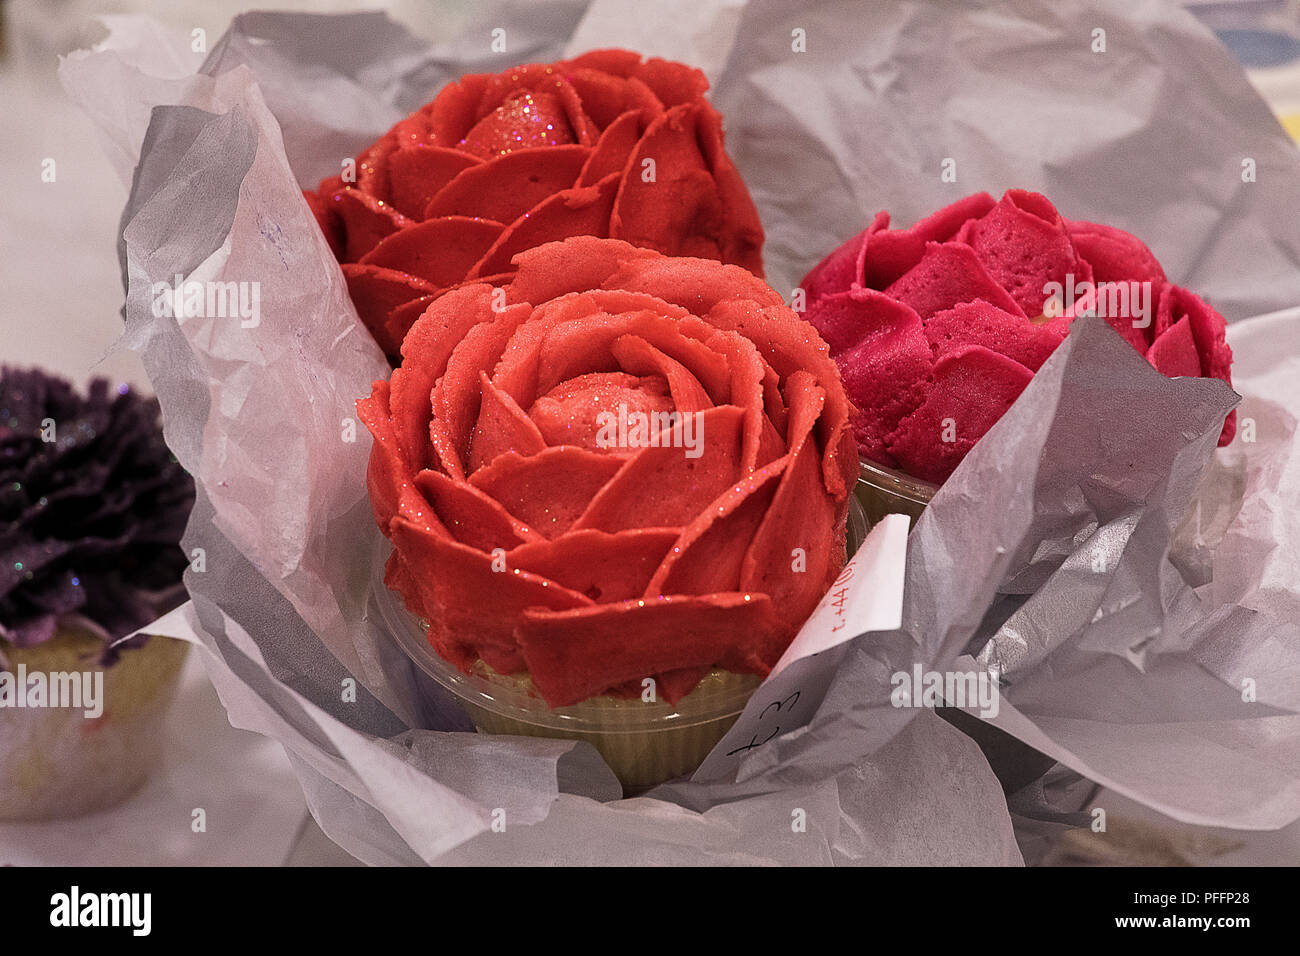 Image of 3 Artisan Cup Cakes Stock Photo